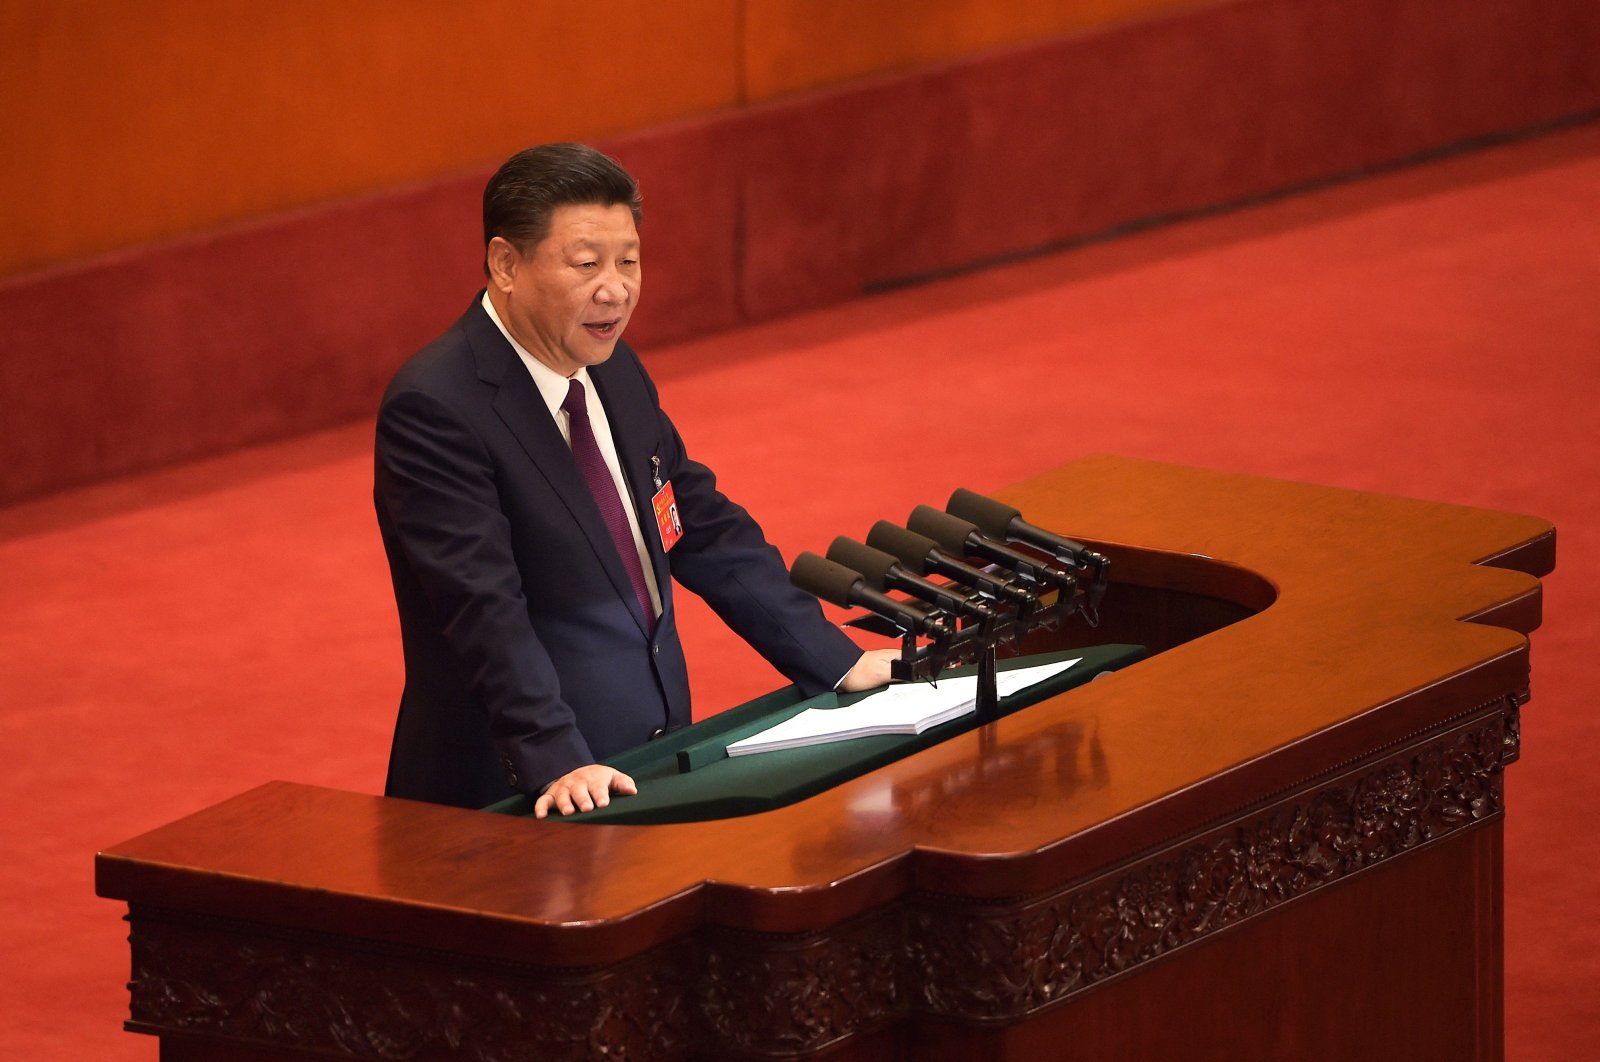 China&#039;s President Xi Jinping delivers a speech at the opening session of the Chinese Communist Party&#039;s five-yearly Congress at the Great Hall of the People in Beijing, China, Oct. 18, 2017. (AFP Photo)